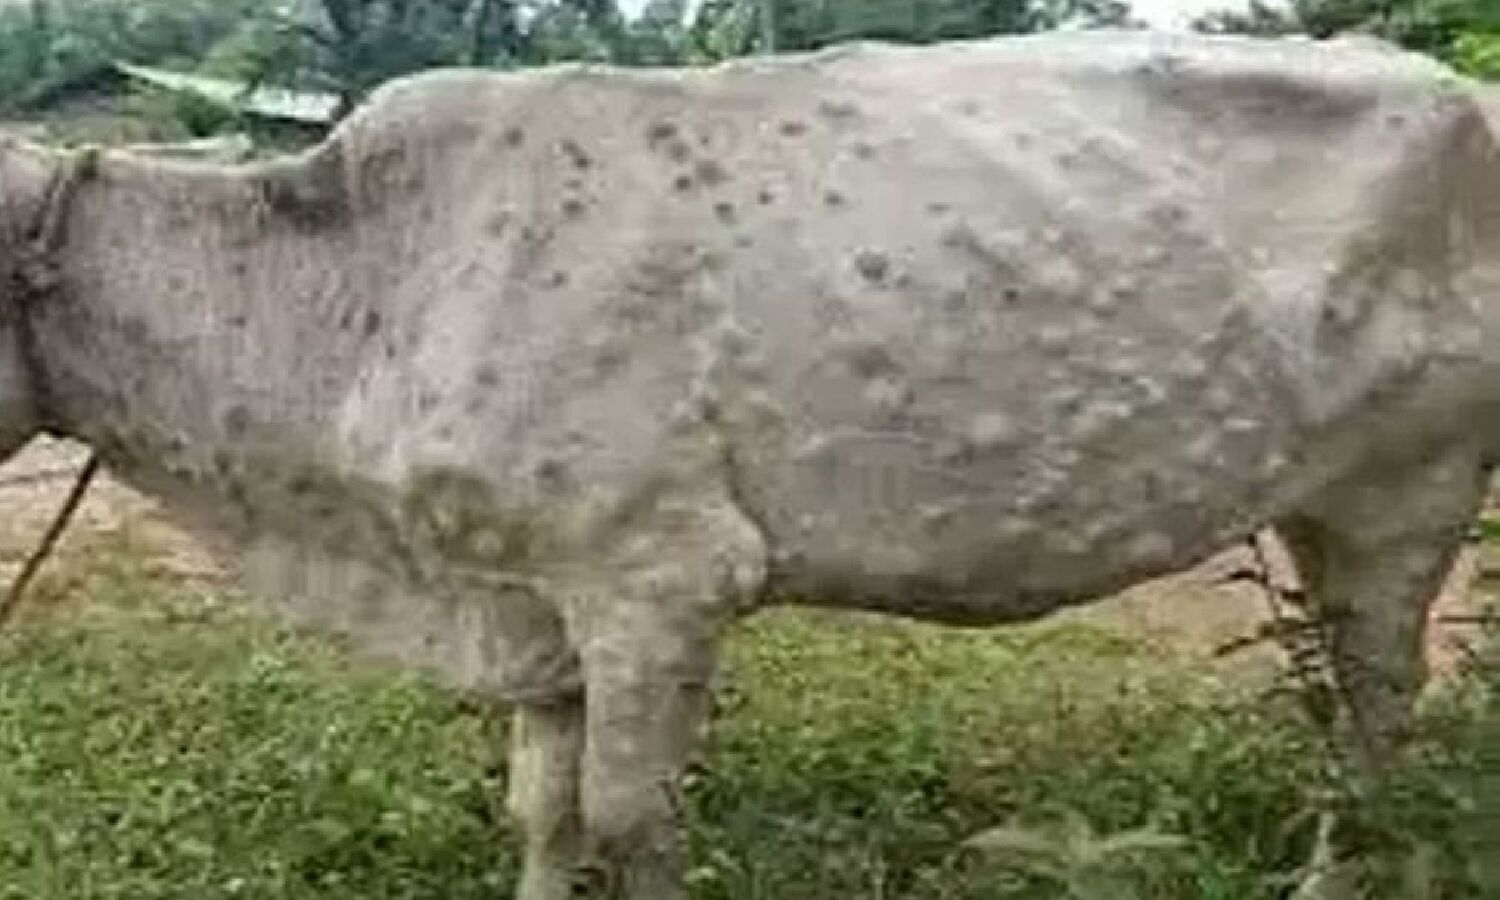 Lumpy skin disease: ‘Lumpy skin’ disease spreading rapidly, thousands of cattle infected